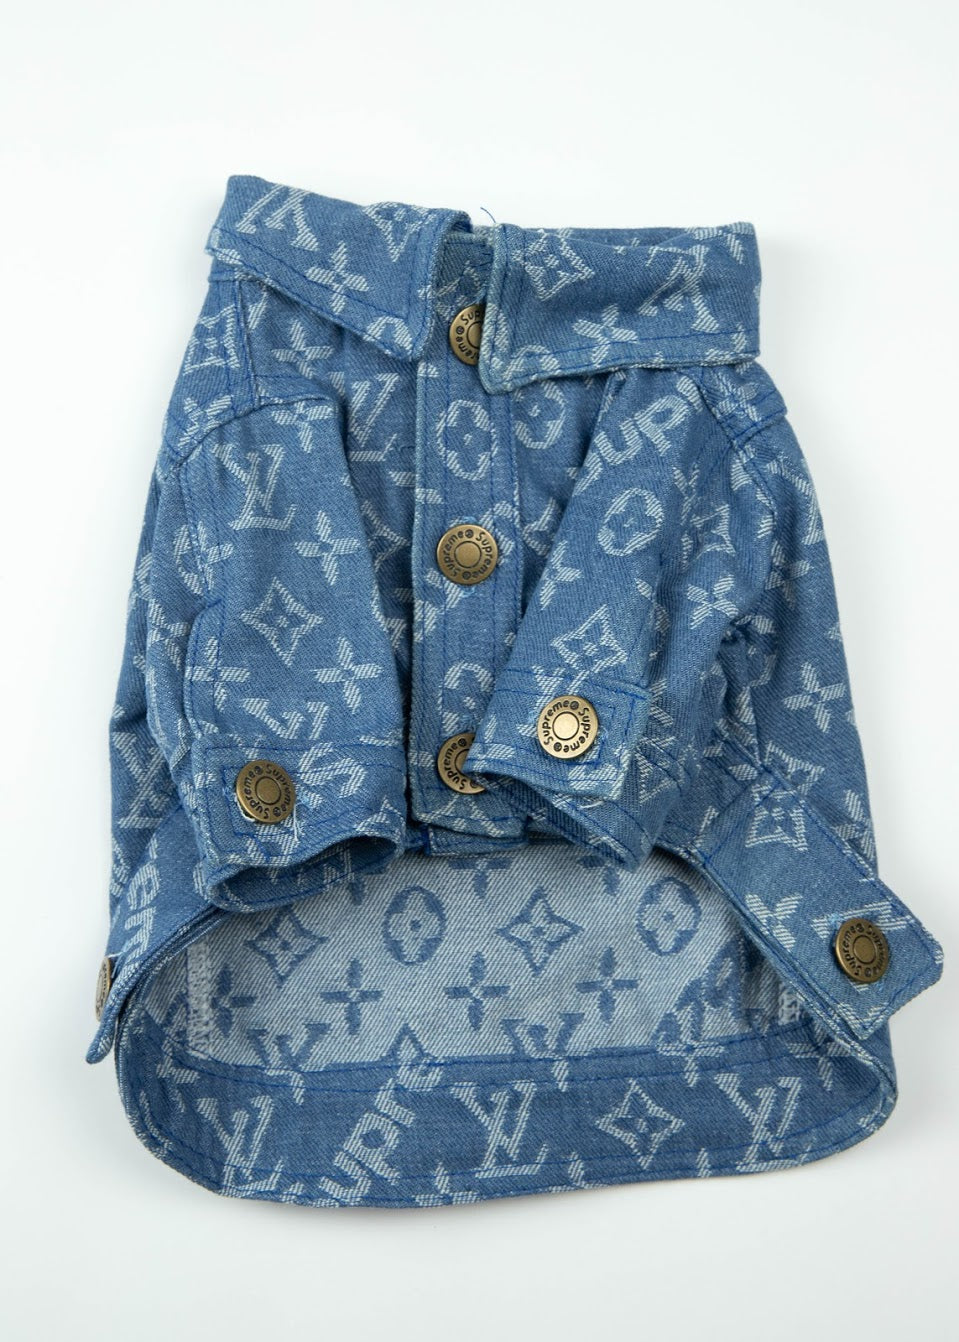 The Chewy Vuitton Denim Jacket for Dogs